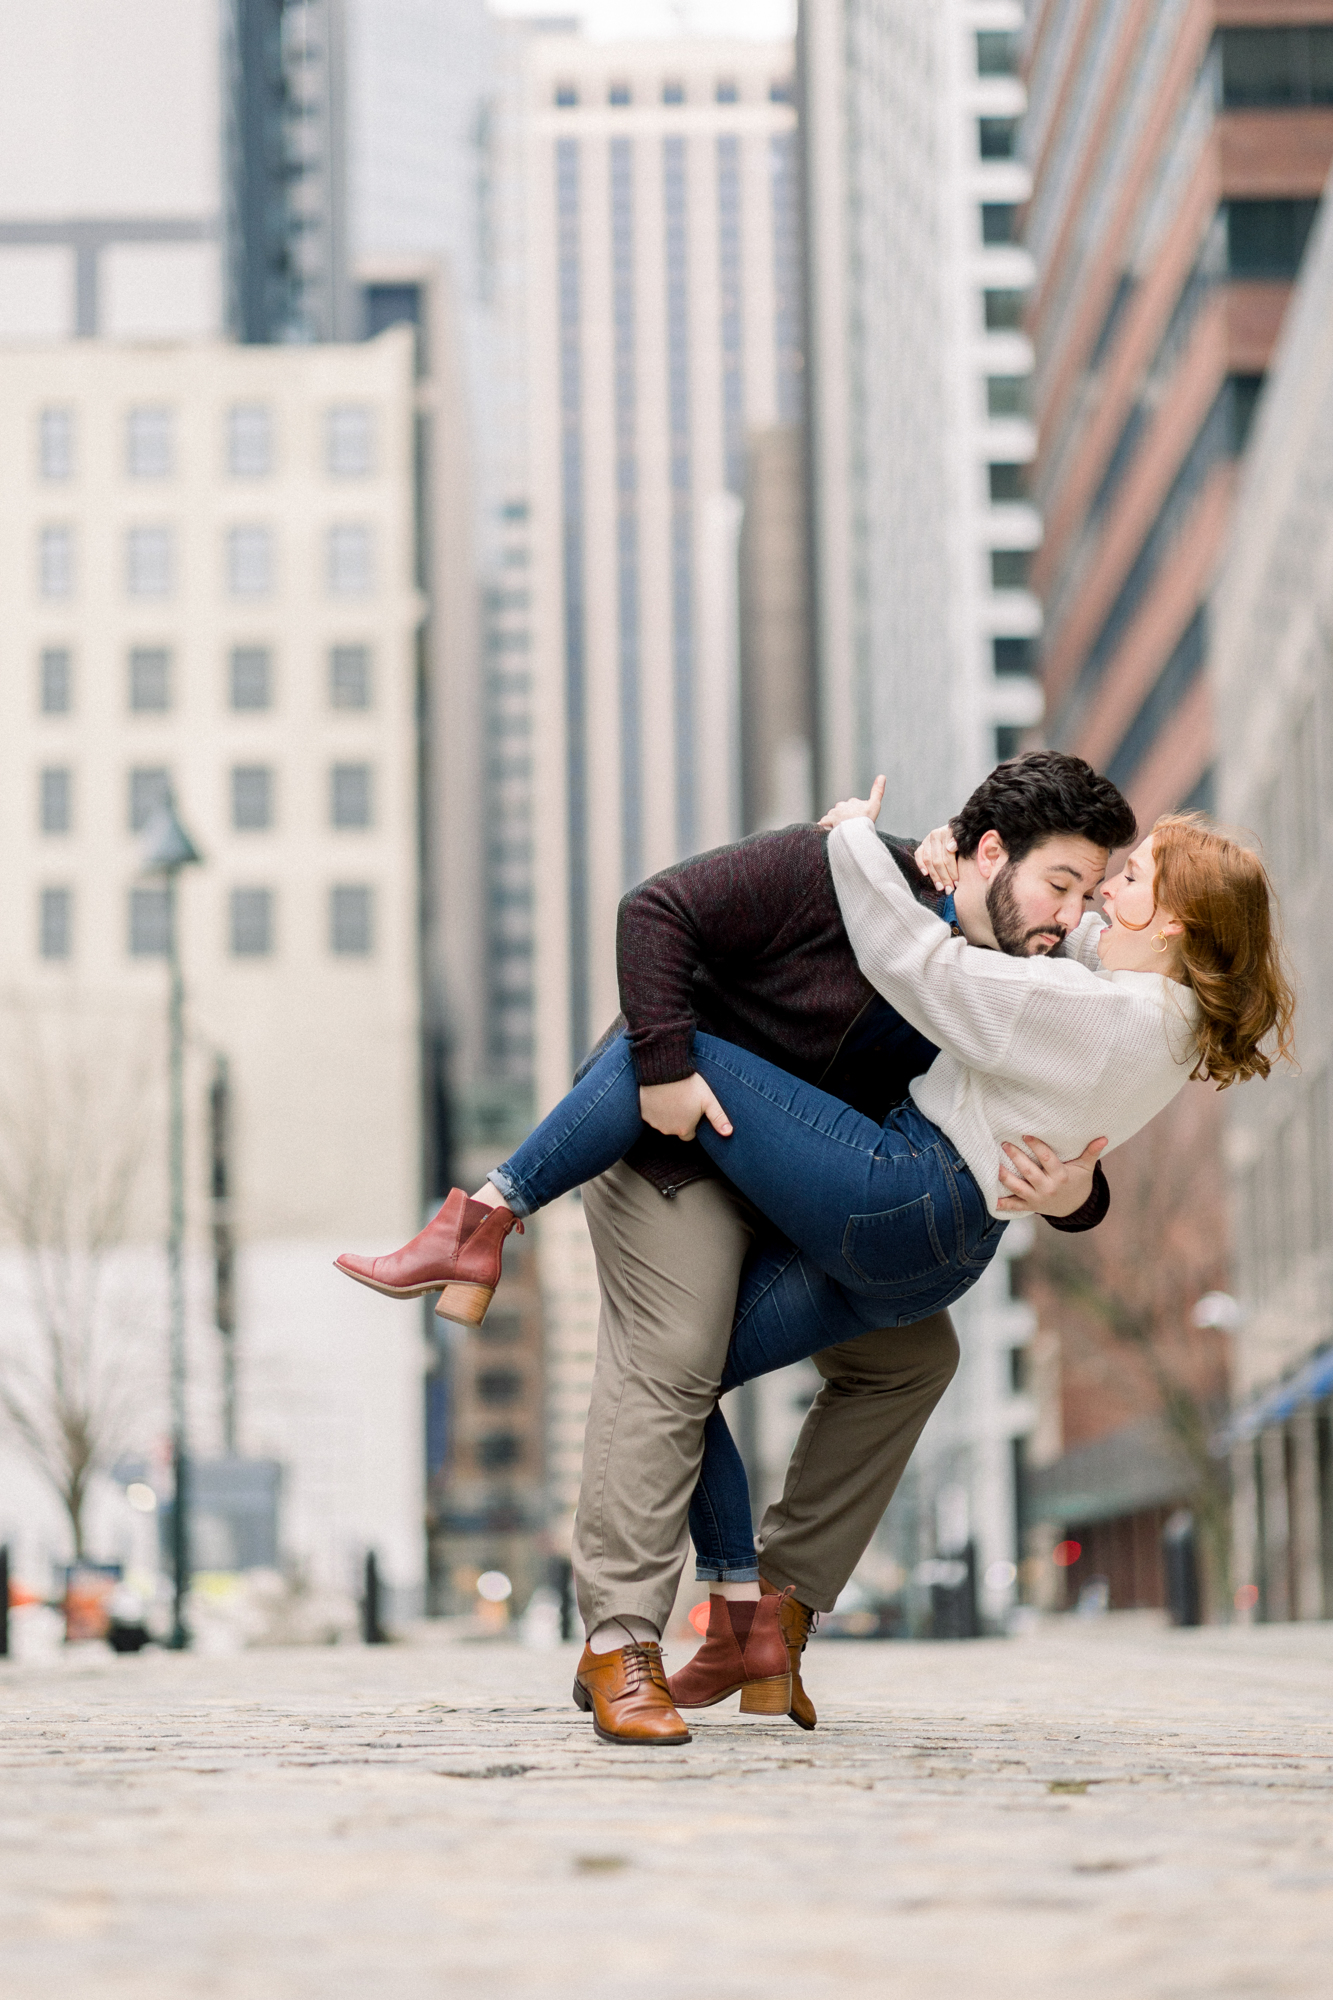 Cute and Candid South Street Seaport Engagement Photos